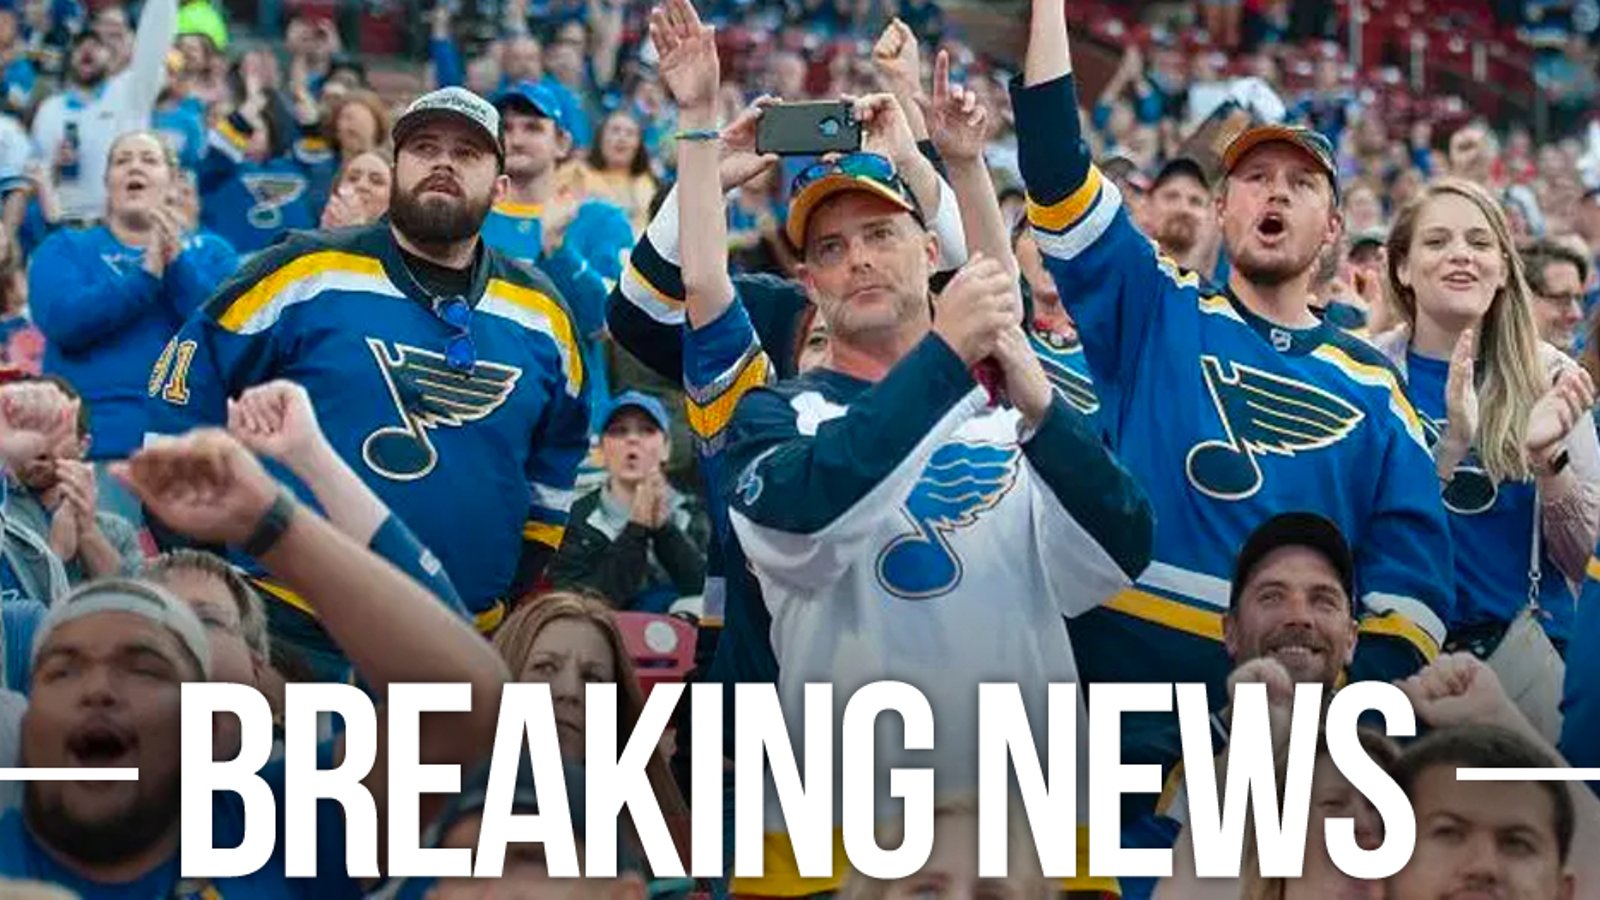 Blues officially welcome fans back to Enterprise Center starting Feb. 2nd